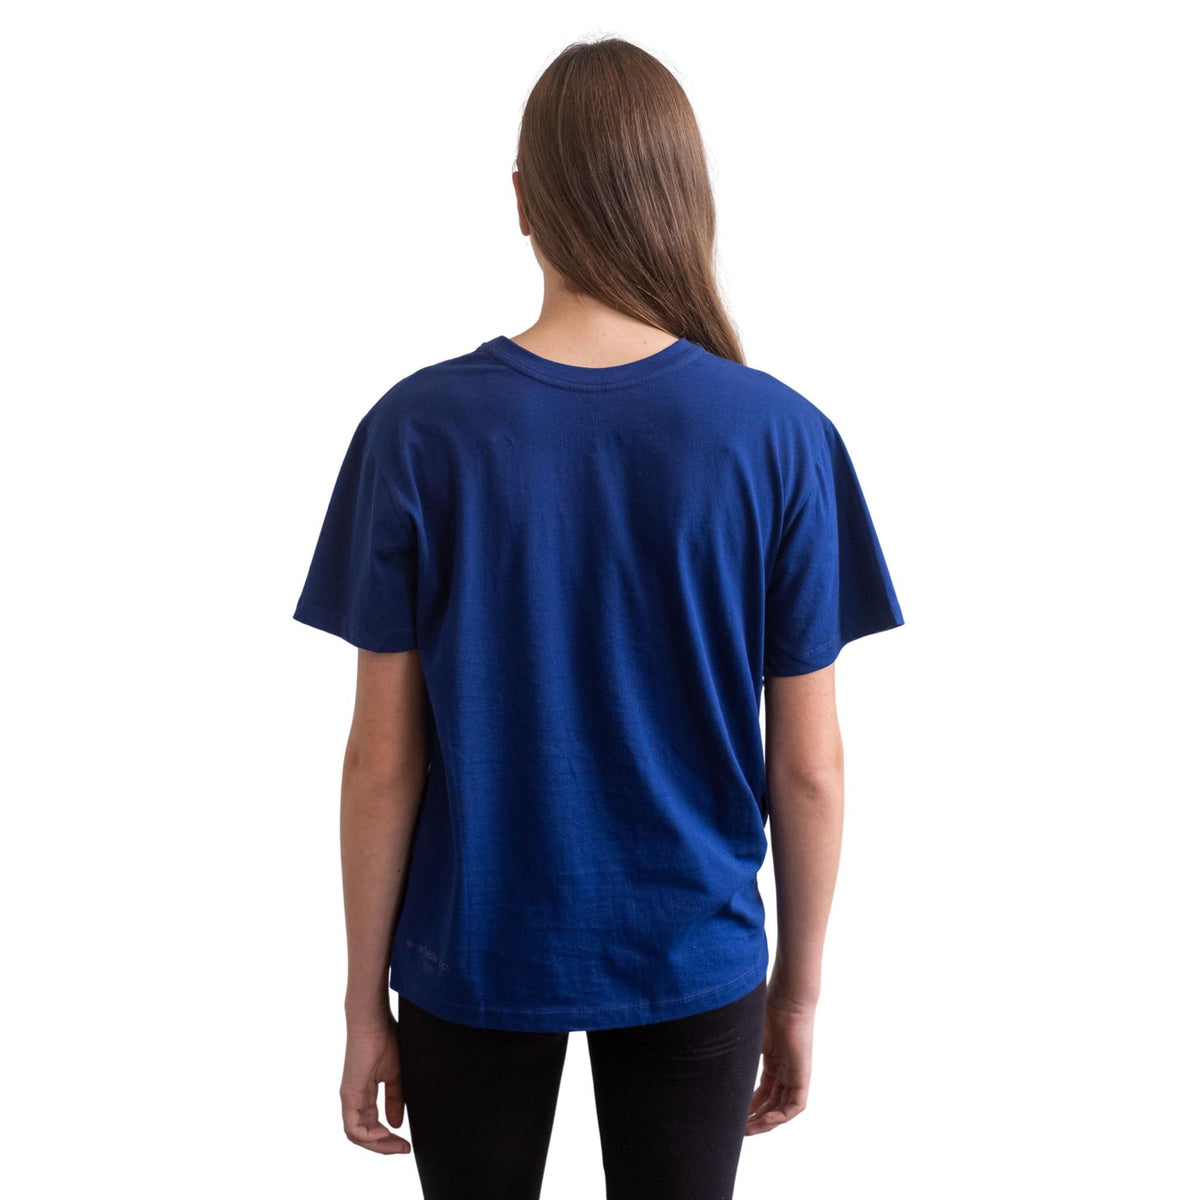 The Comfy T-Shirt-Teens. No tags, no lables. The Shapes United.